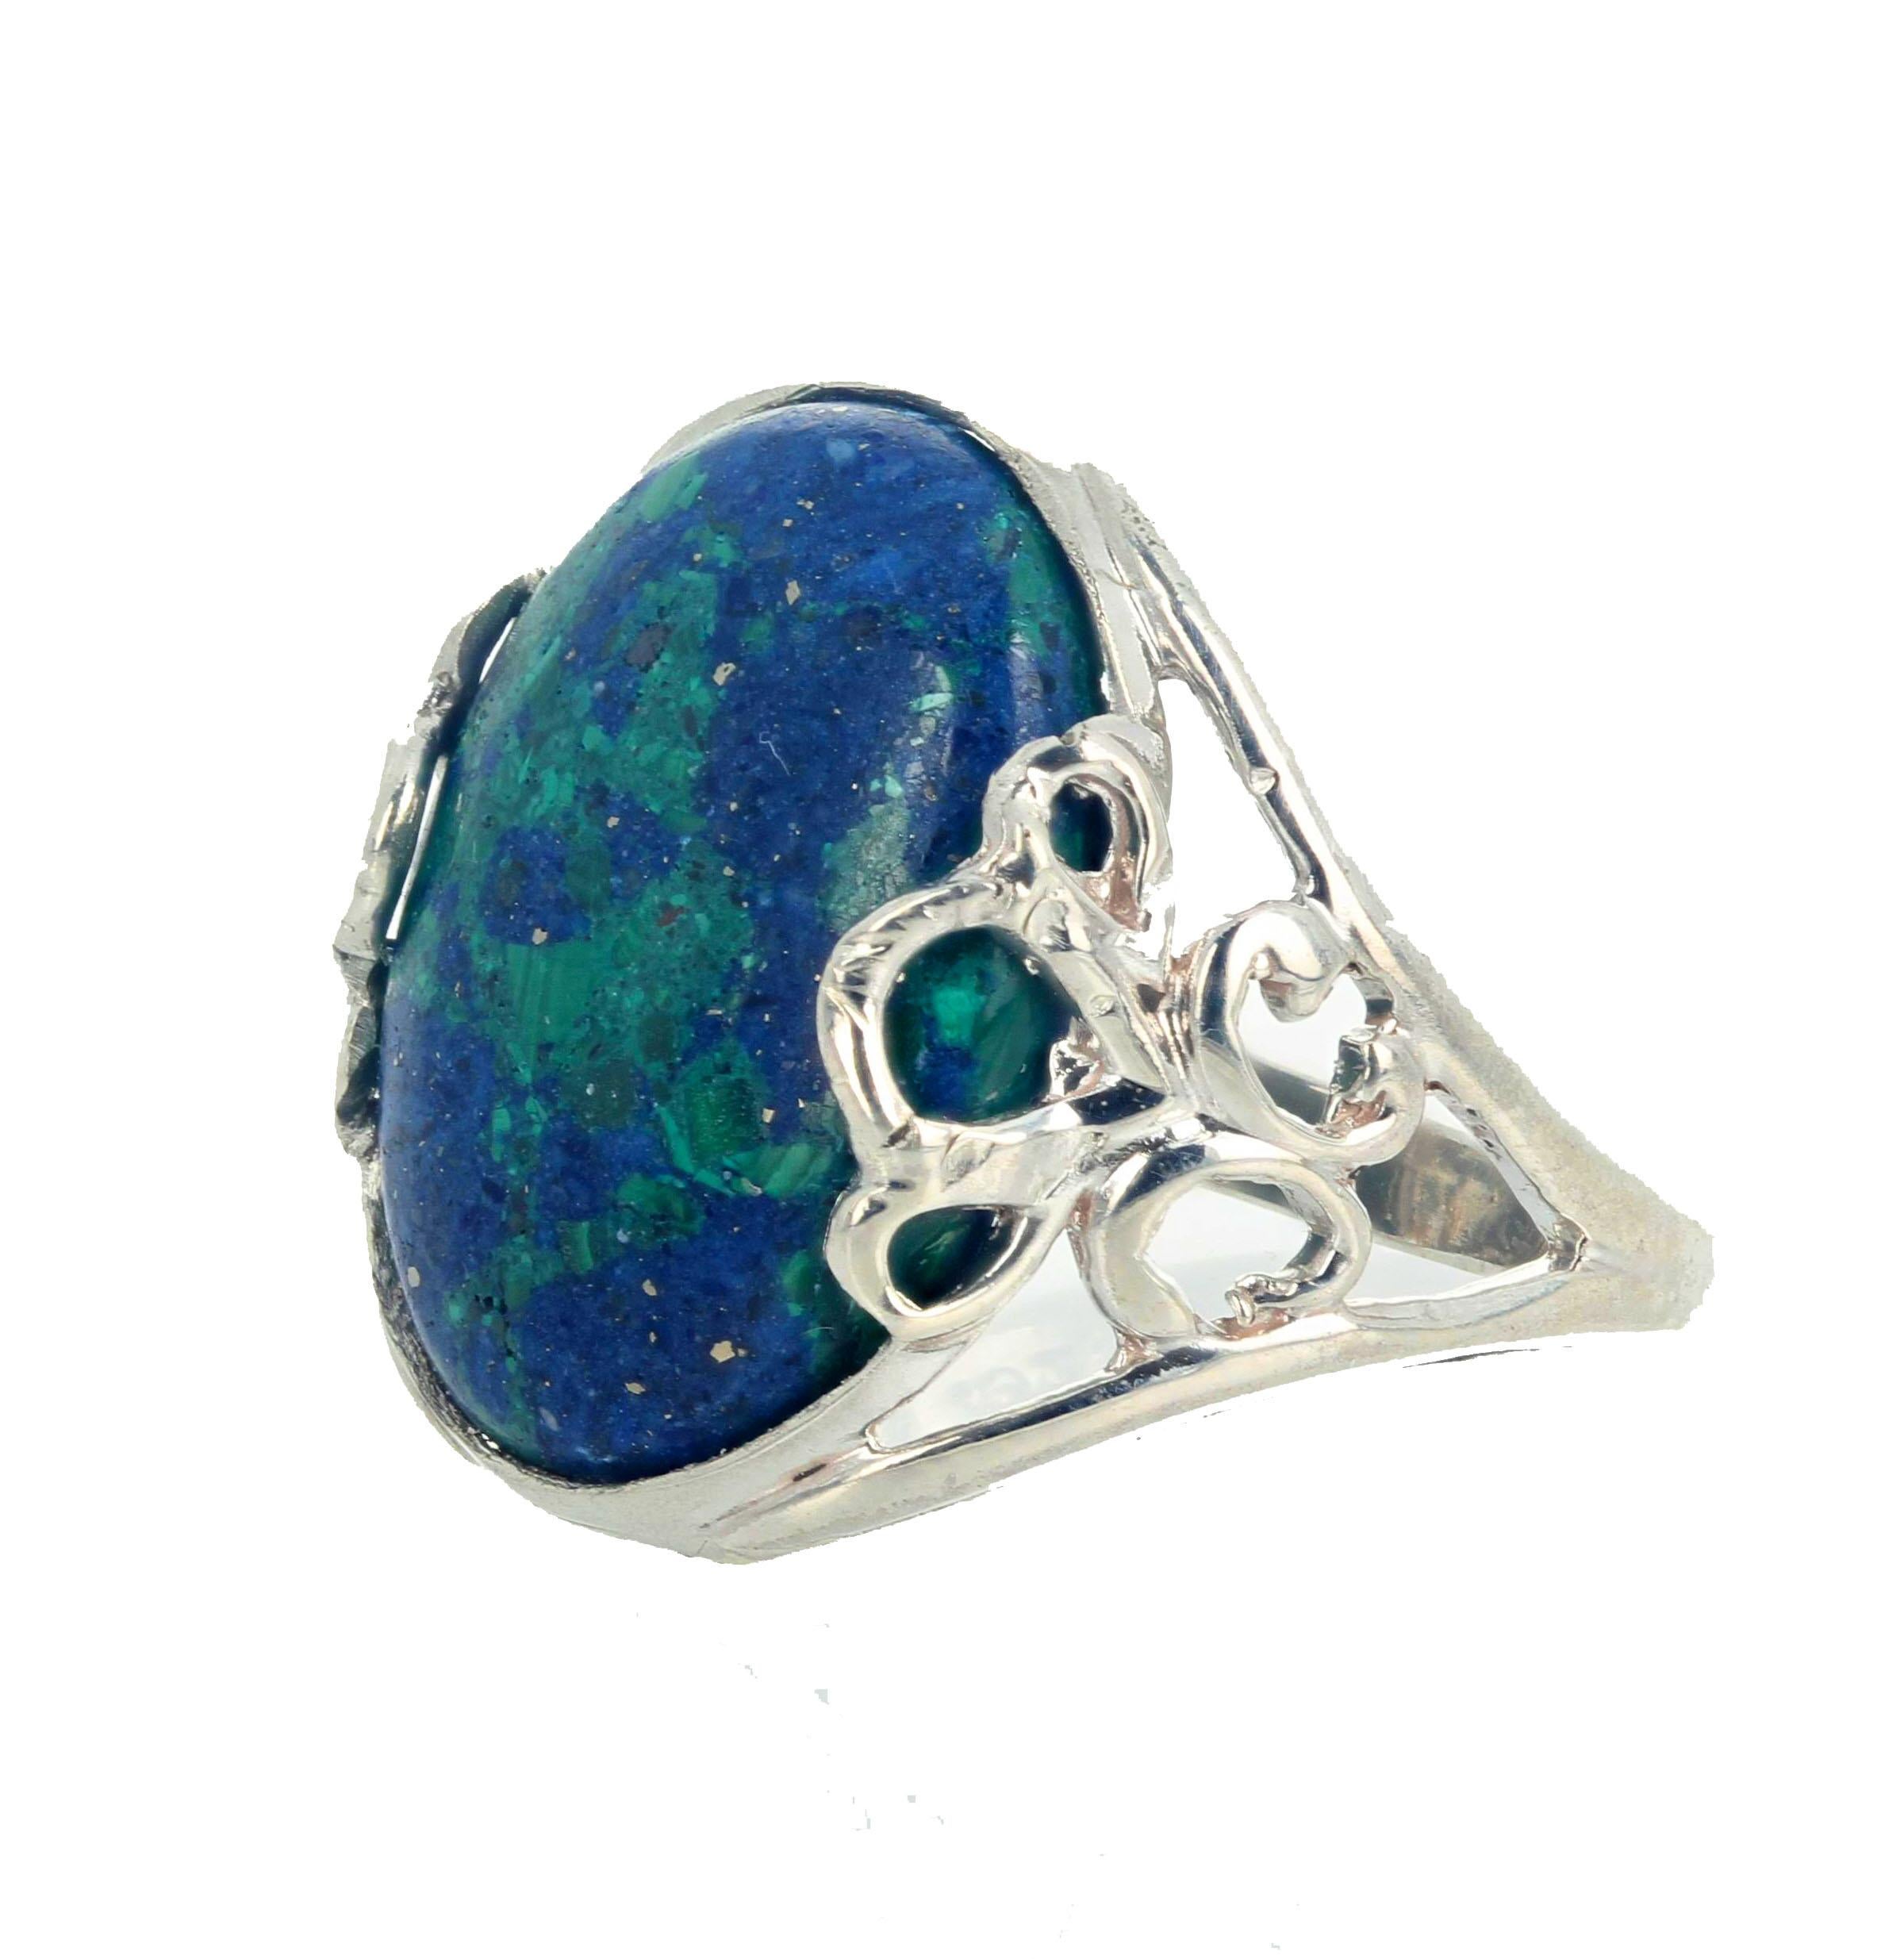 This fascinating Chrysocolla Natural Semiprecious Polished Gemstone is 18mm x 15.5 mm set in a lovely sterling silver 